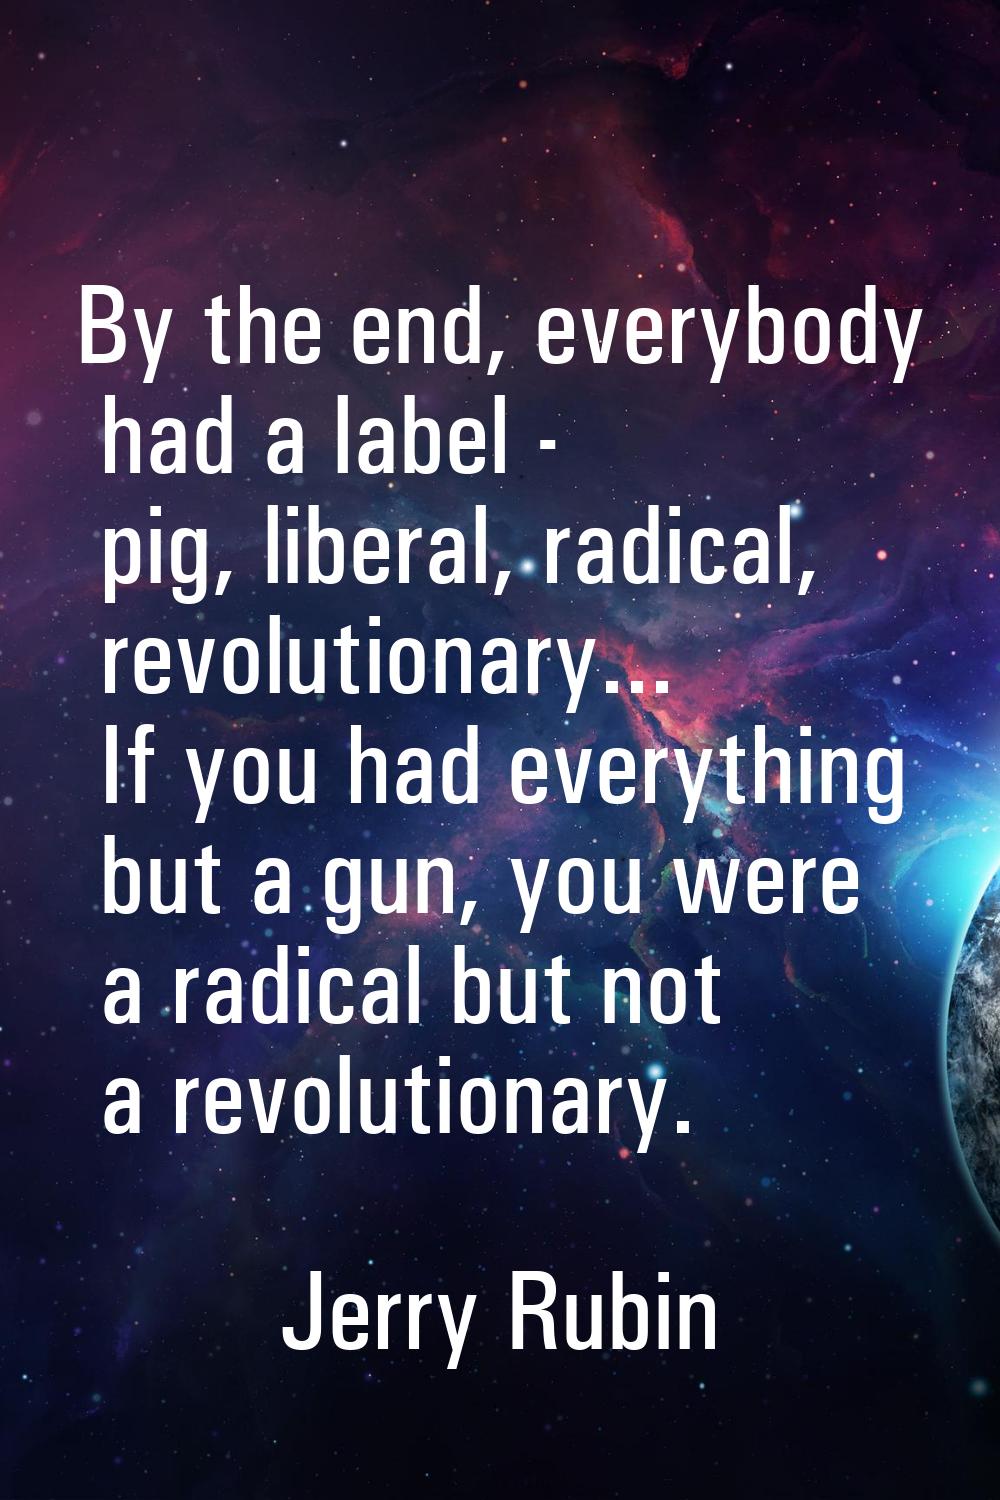 By the end, everybody had a label - pig, liberal, radical, revolutionary... If you had everything b